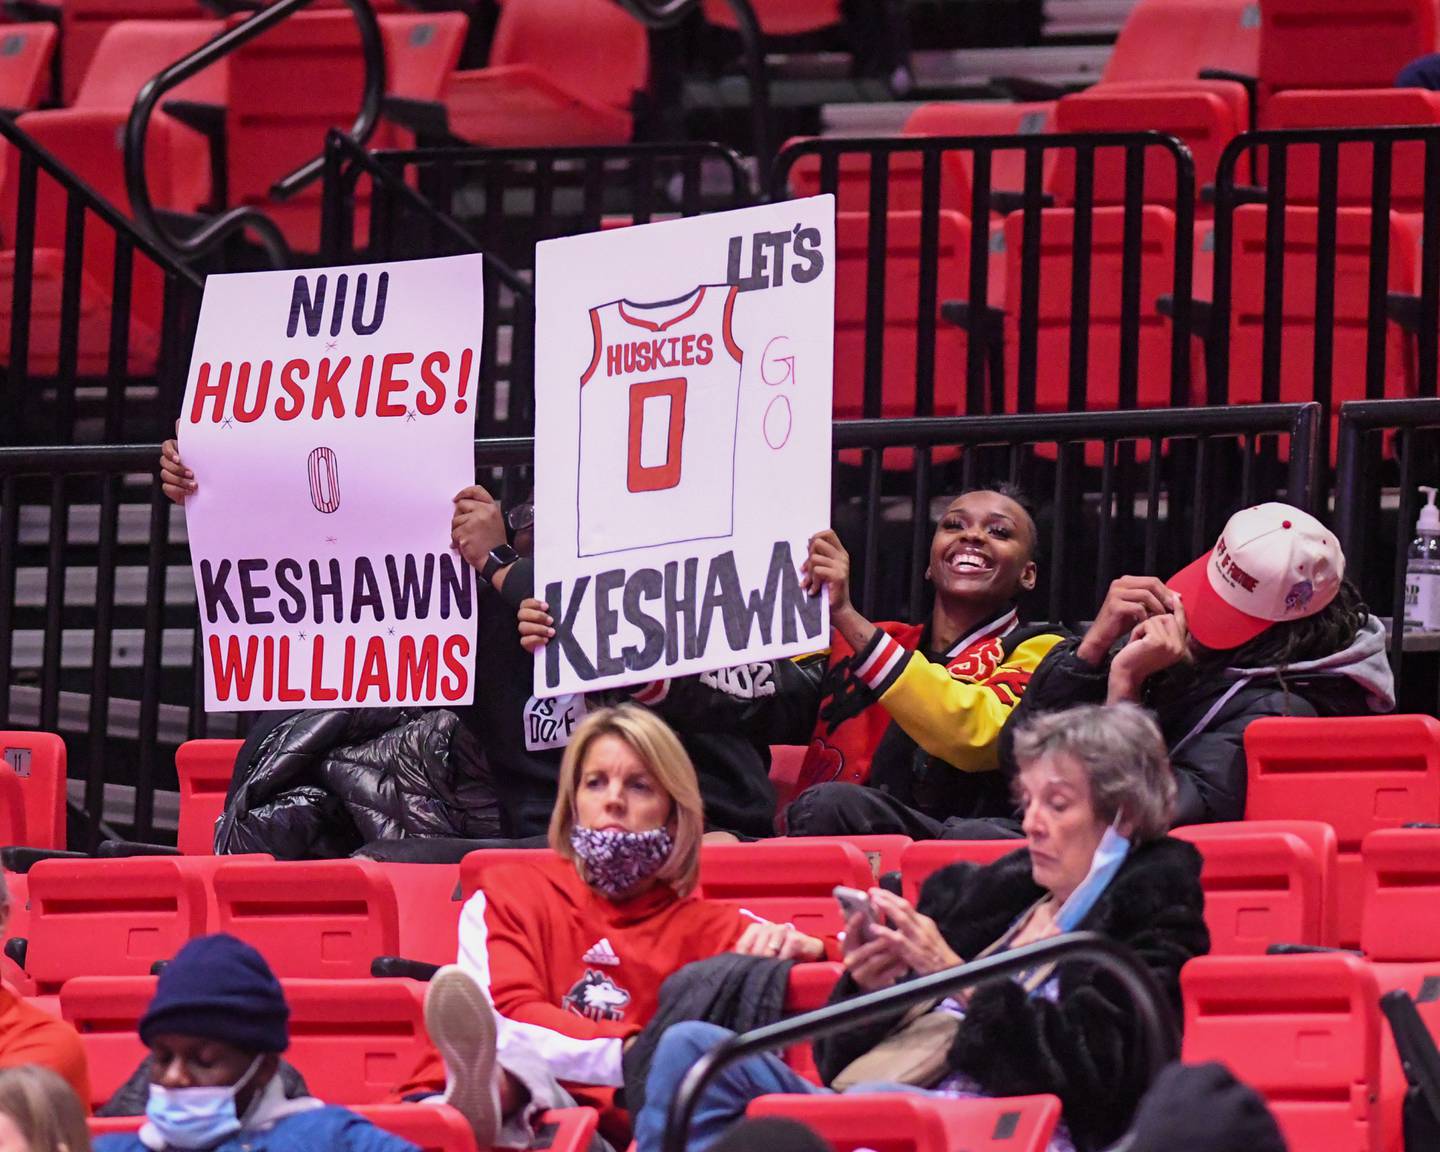 Some fans of NIU guard Keshawn Williams shy away as others hold signs that were shown on the jumbotron during the first half of the game on Tuesday Dec. 1st while taking on Eastern Illinois.